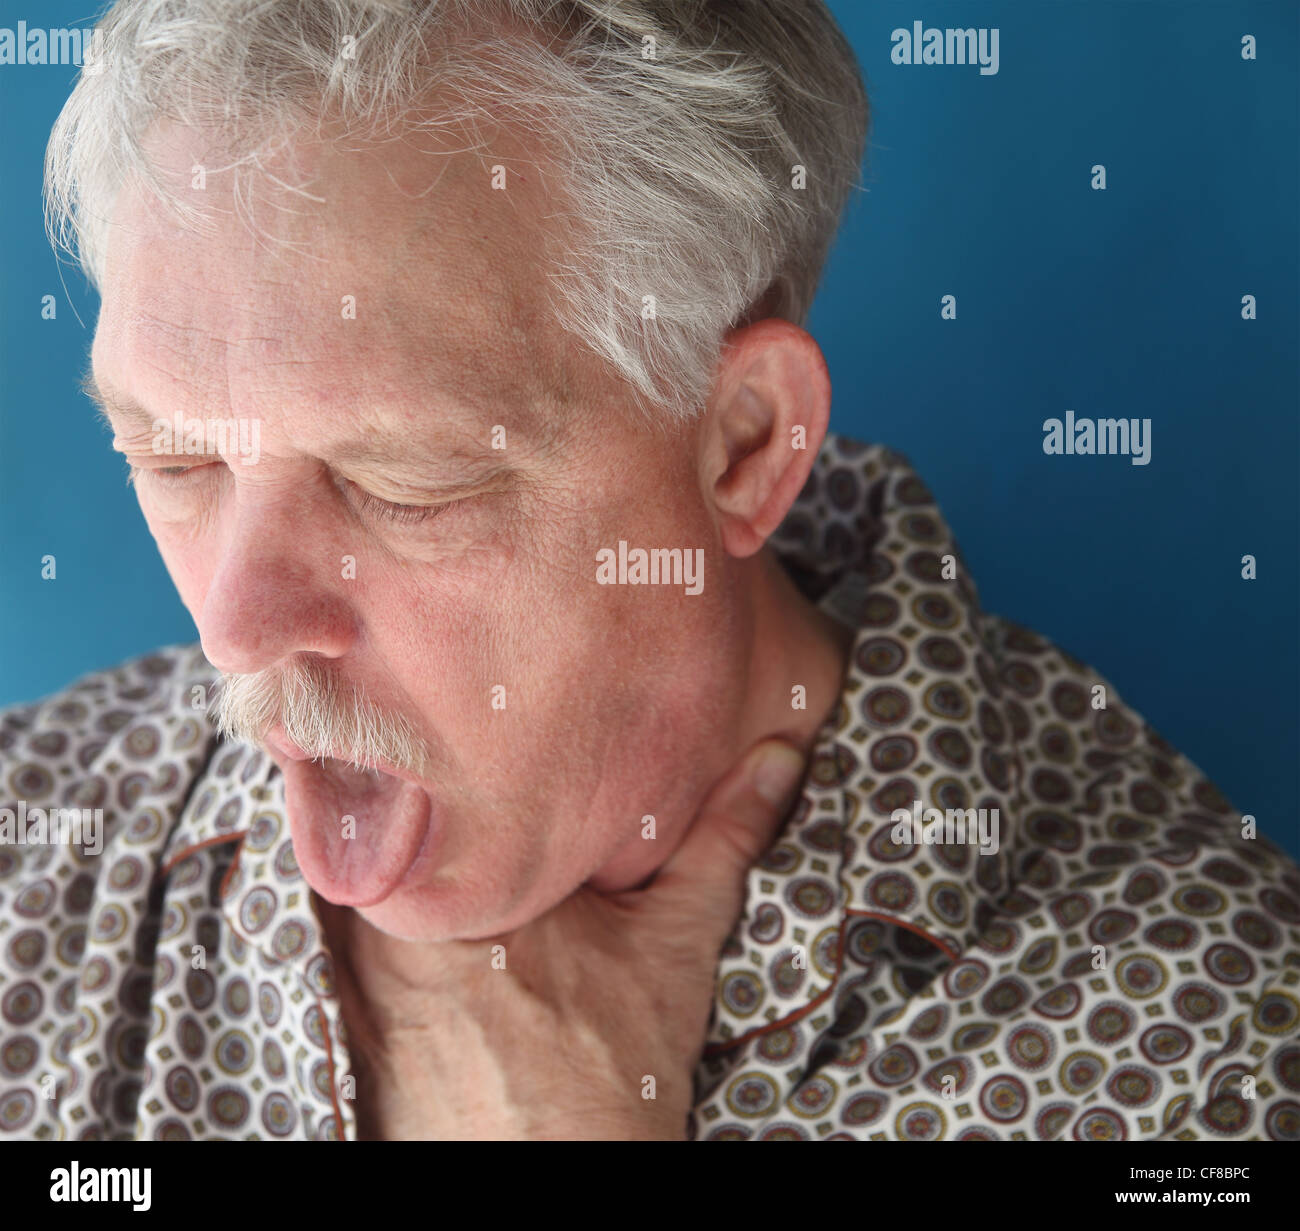 an older man with a bad cough Stock Photo